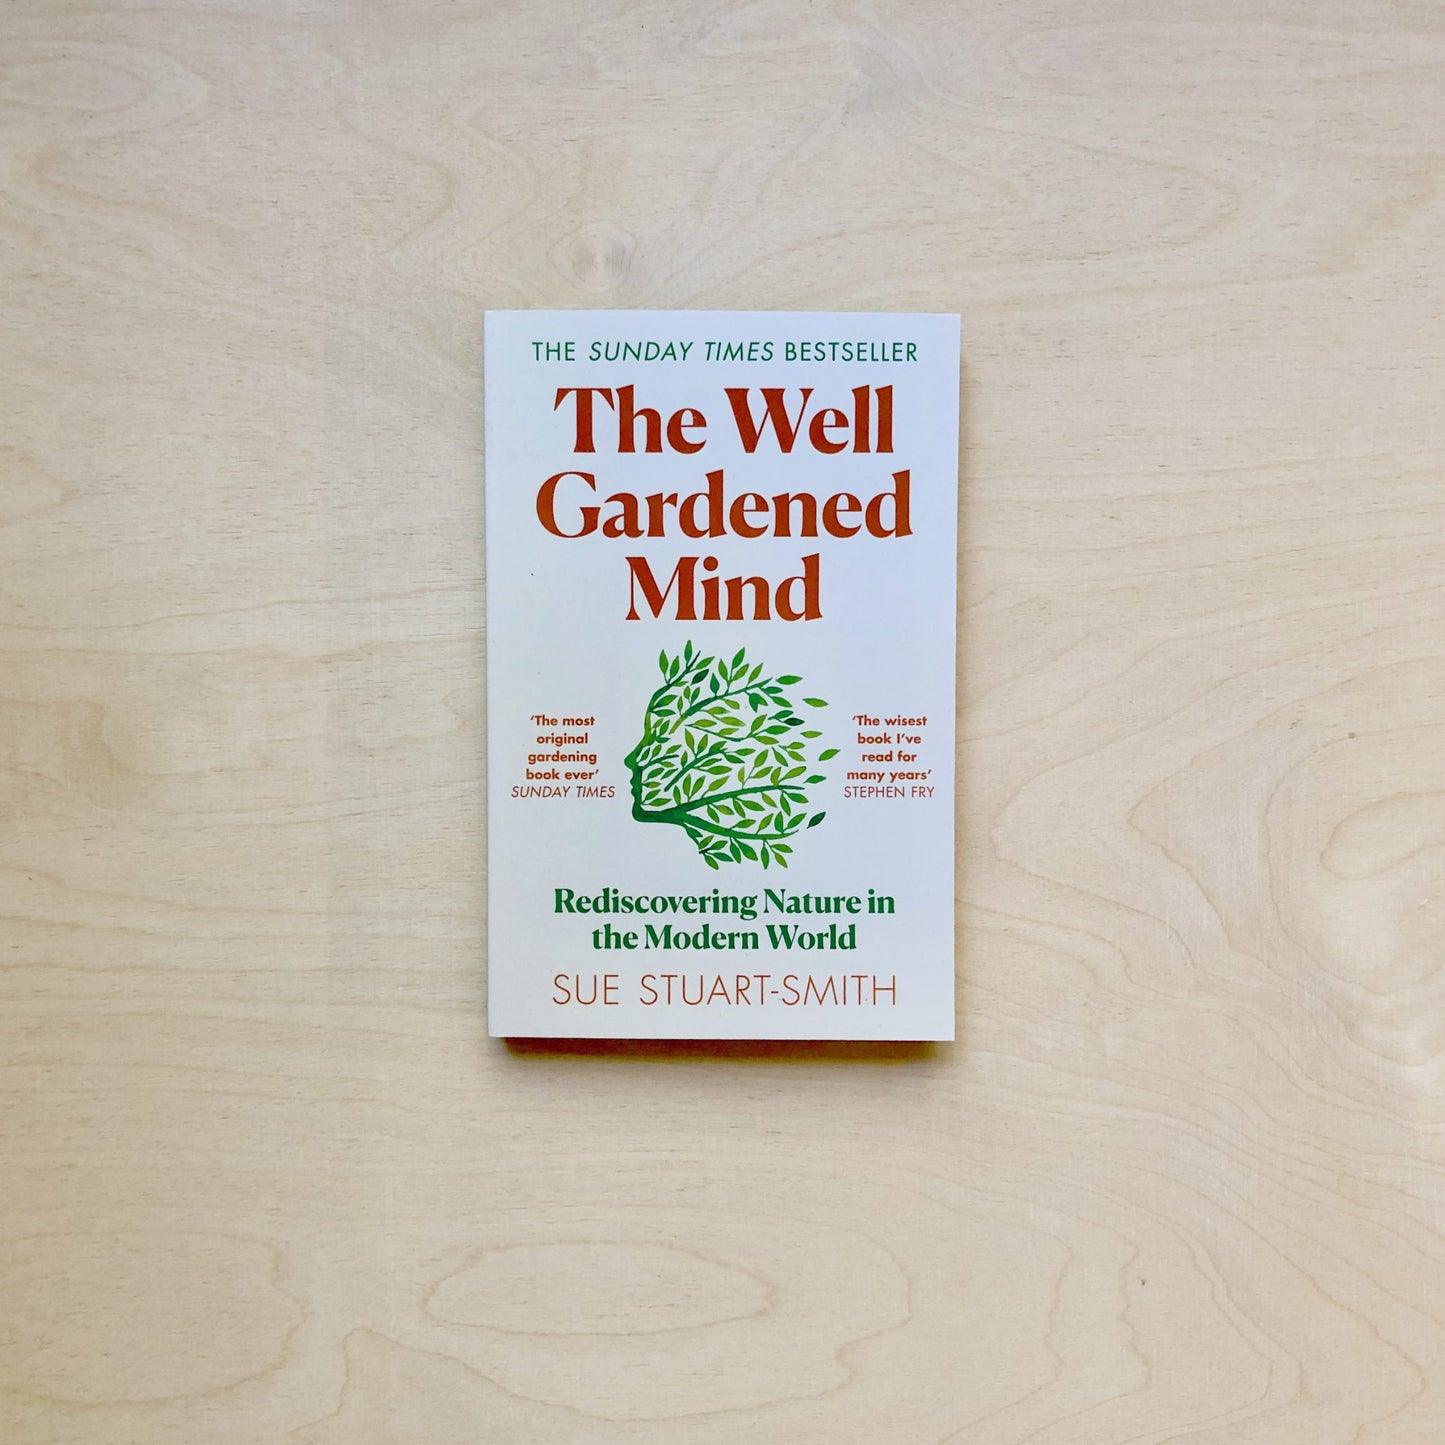 The Well Gardened Mind - Rediscovering Nature in the Modern World